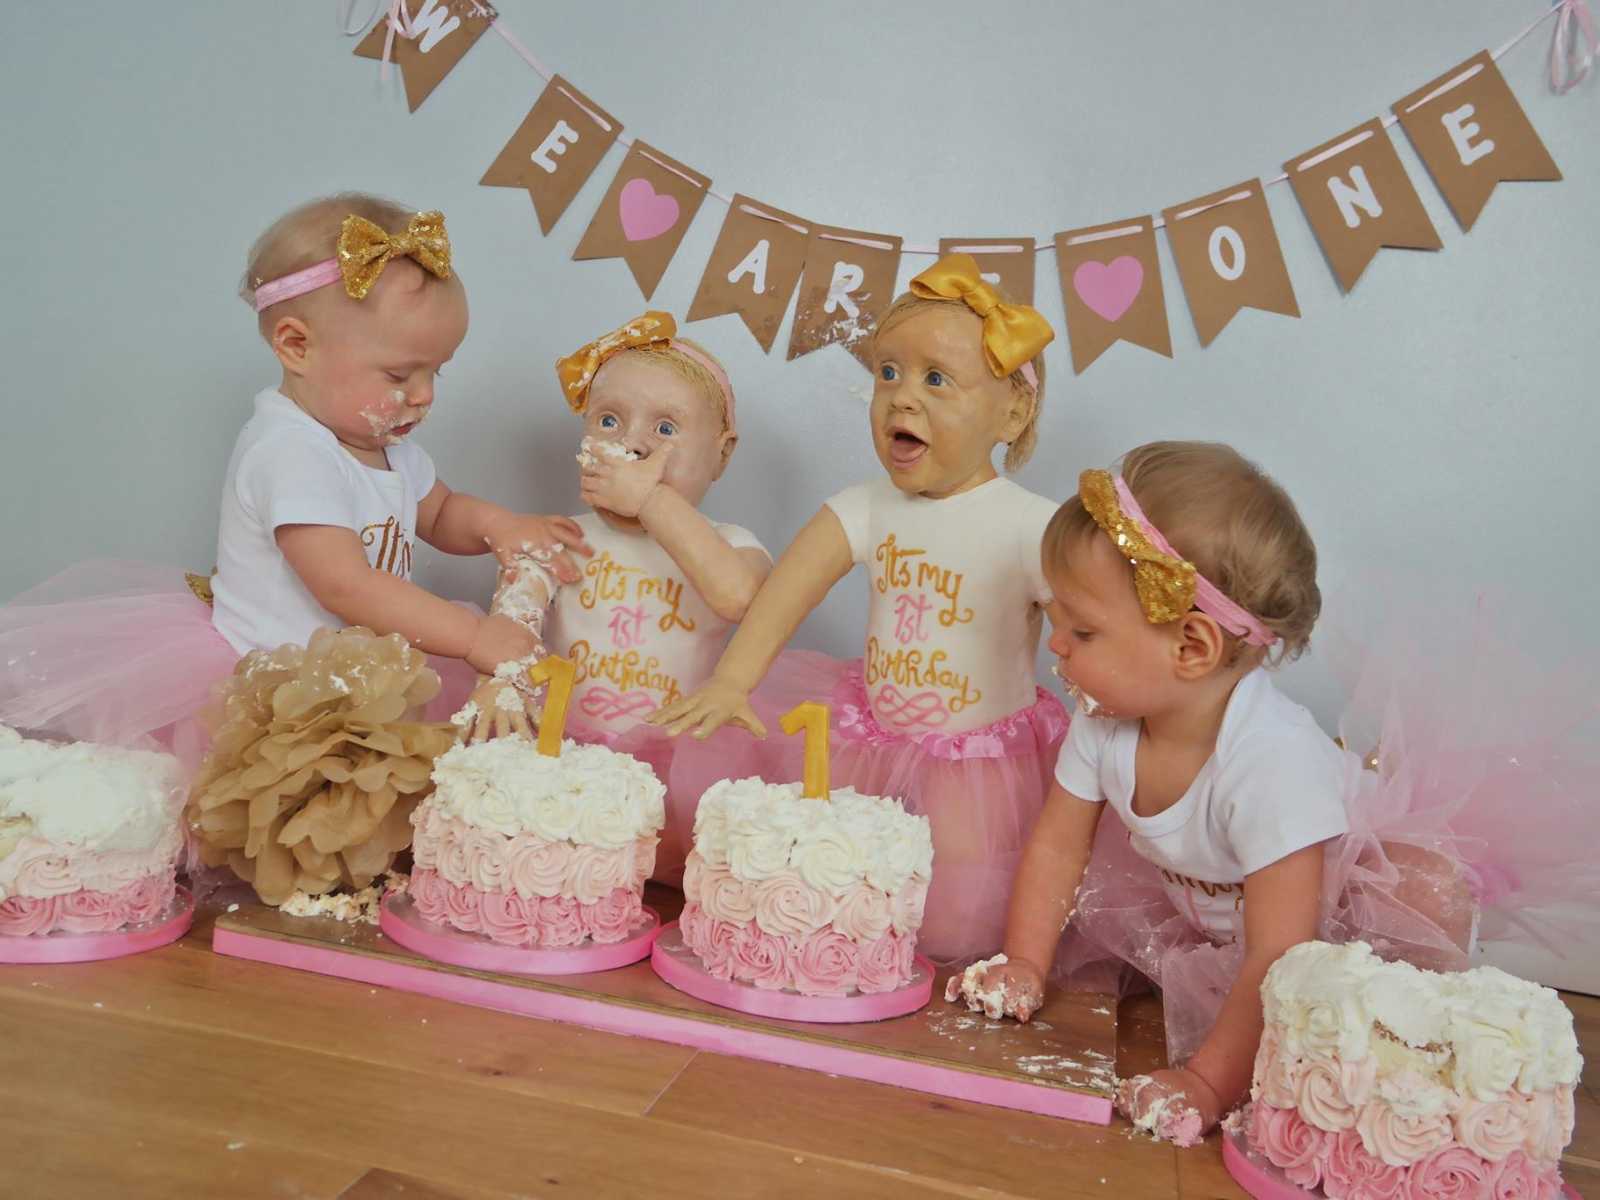 infant girl touches arm of cake that looks like her while other infant looks at two cakes with pink and white roses on it